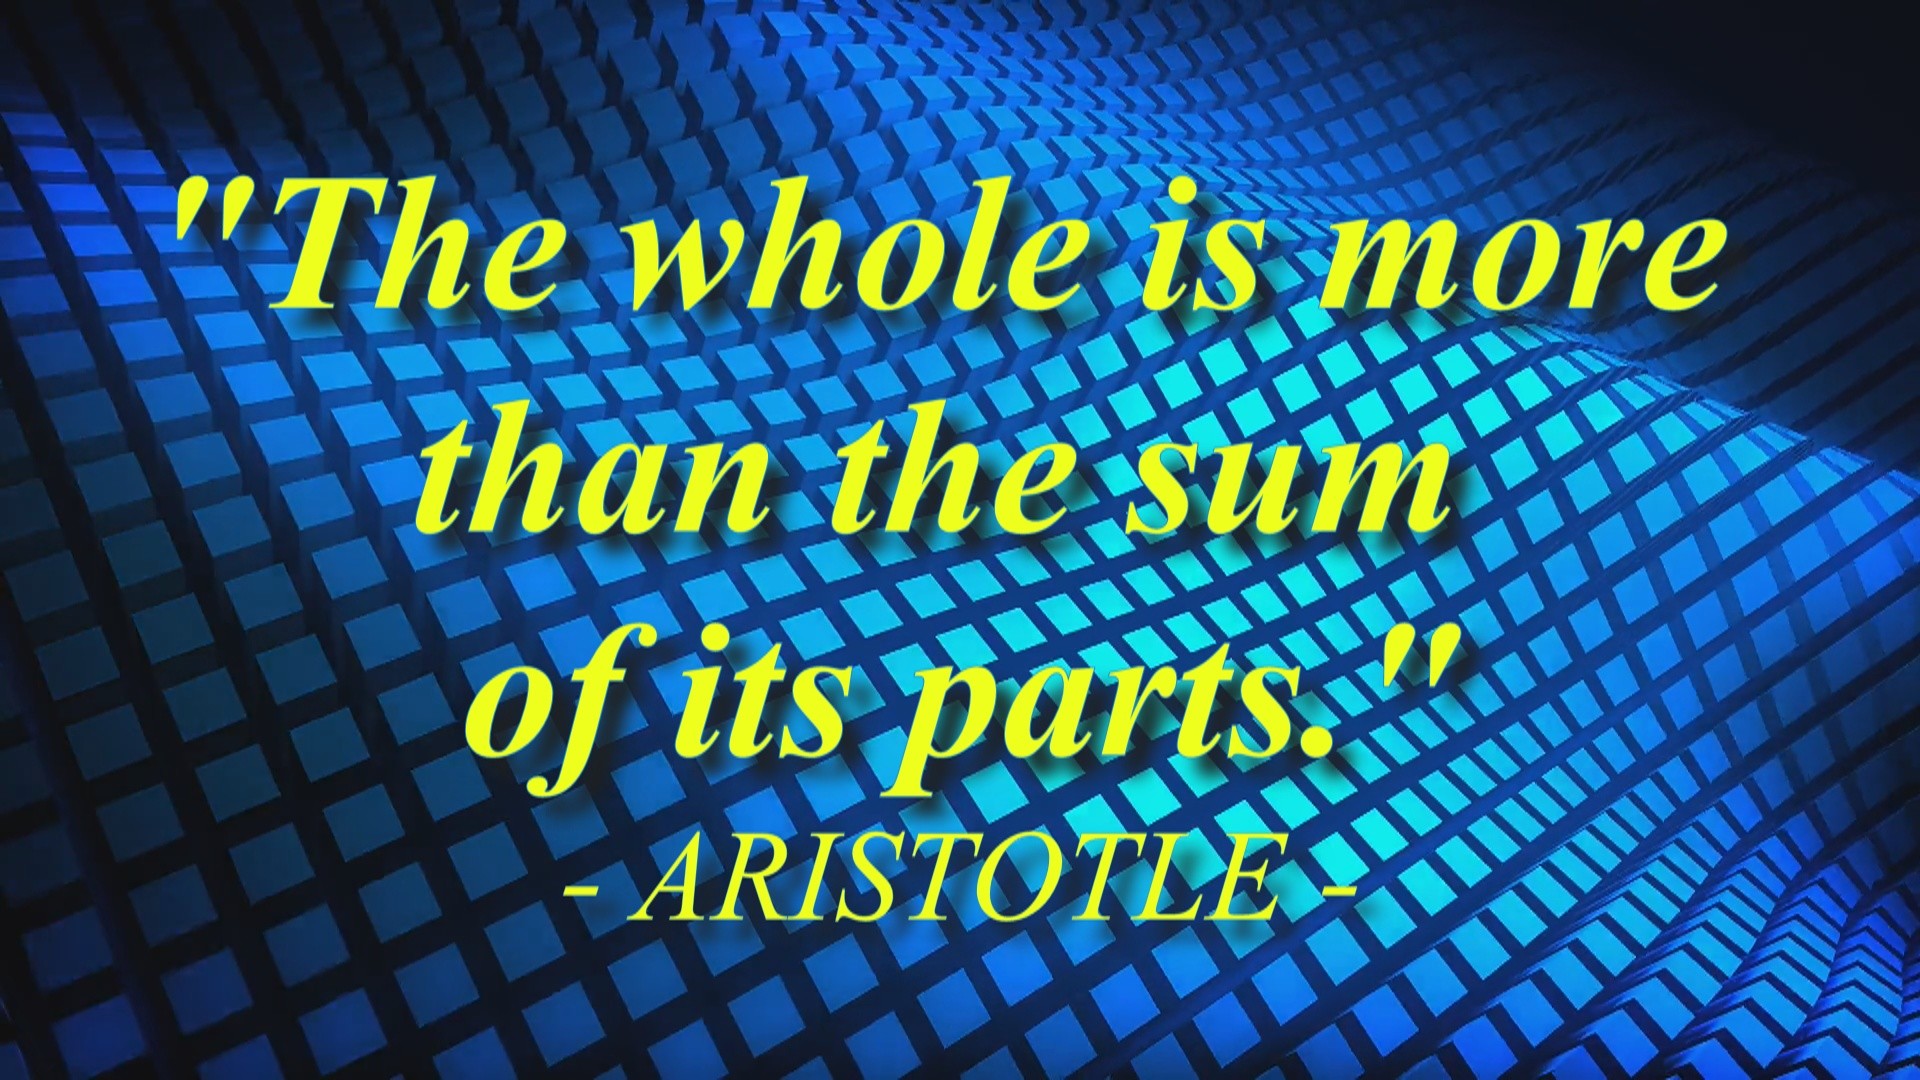 The whole is more than the sum of the its parts - Aristotle